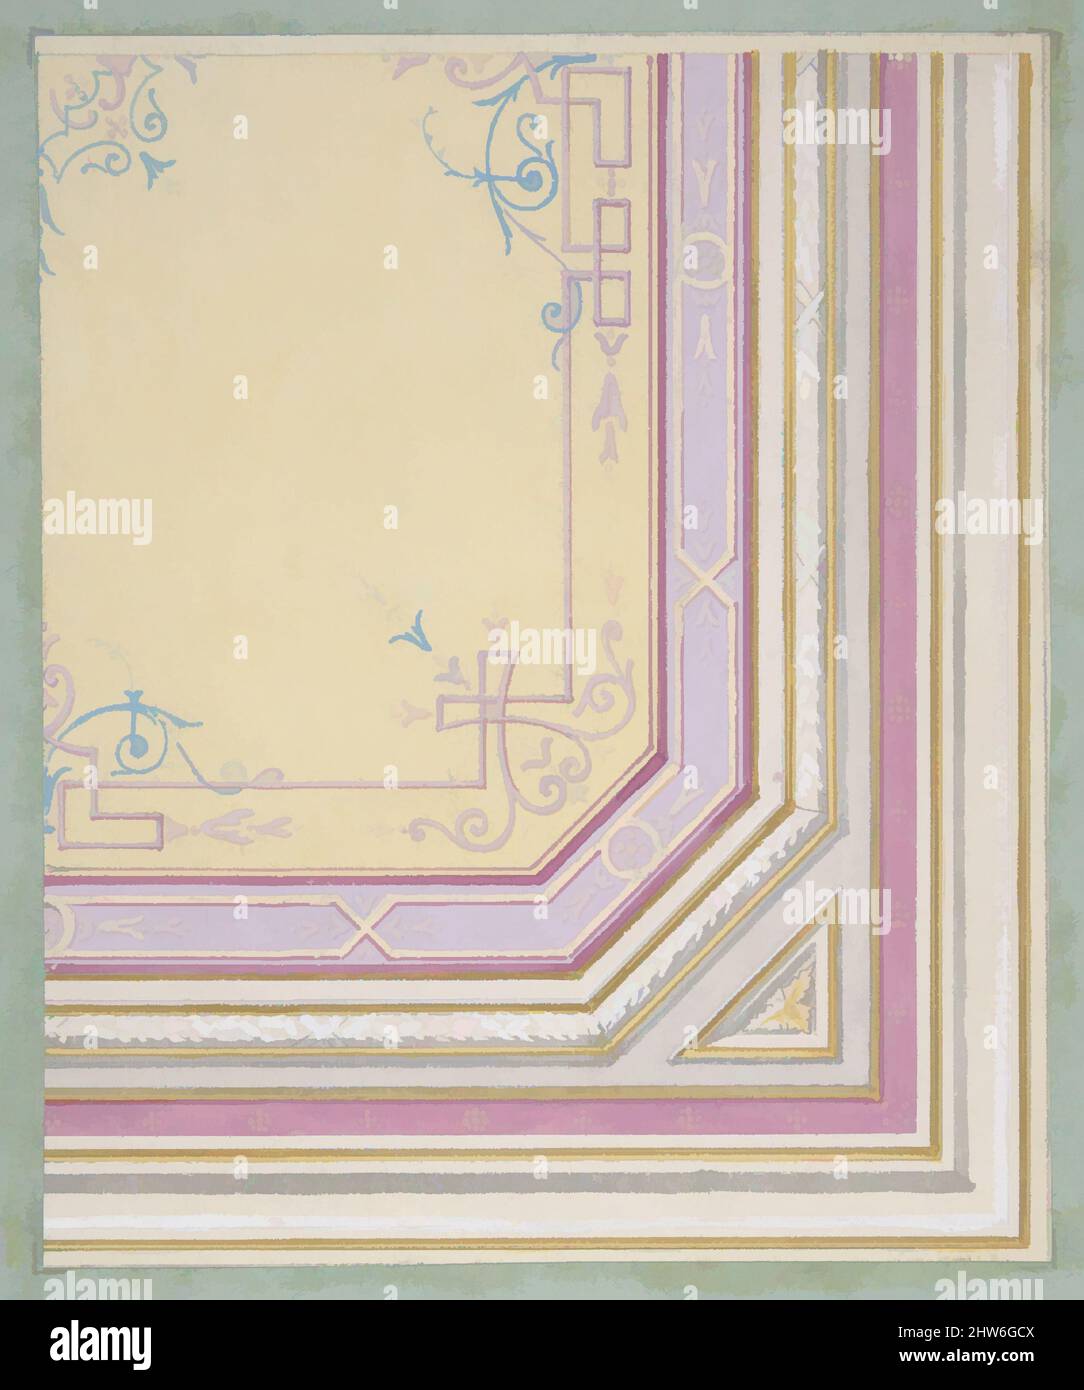 Art inspired by Partial design for the painted decoration of a ceiling, 1830–97, wash, watercolor, gouache, and gold paint over graphite on wove paper; mounted on blue wove paper, Overall: 10 5/8 x 8 1/4 in. (27 x 21 cm), Drawings, Jules-Edmond-Charles Lachaise (French, died 1897, Classic works modernized by Artotop with a splash of modernity. Shapes, color and value, eye-catching visual impact on art. Emotions through freedom of artworks in a contemporary way. A timeless message pursuing a wildly creative new direction. Artists turning to the digital medium and creating the Artotop NFT Stock Photo